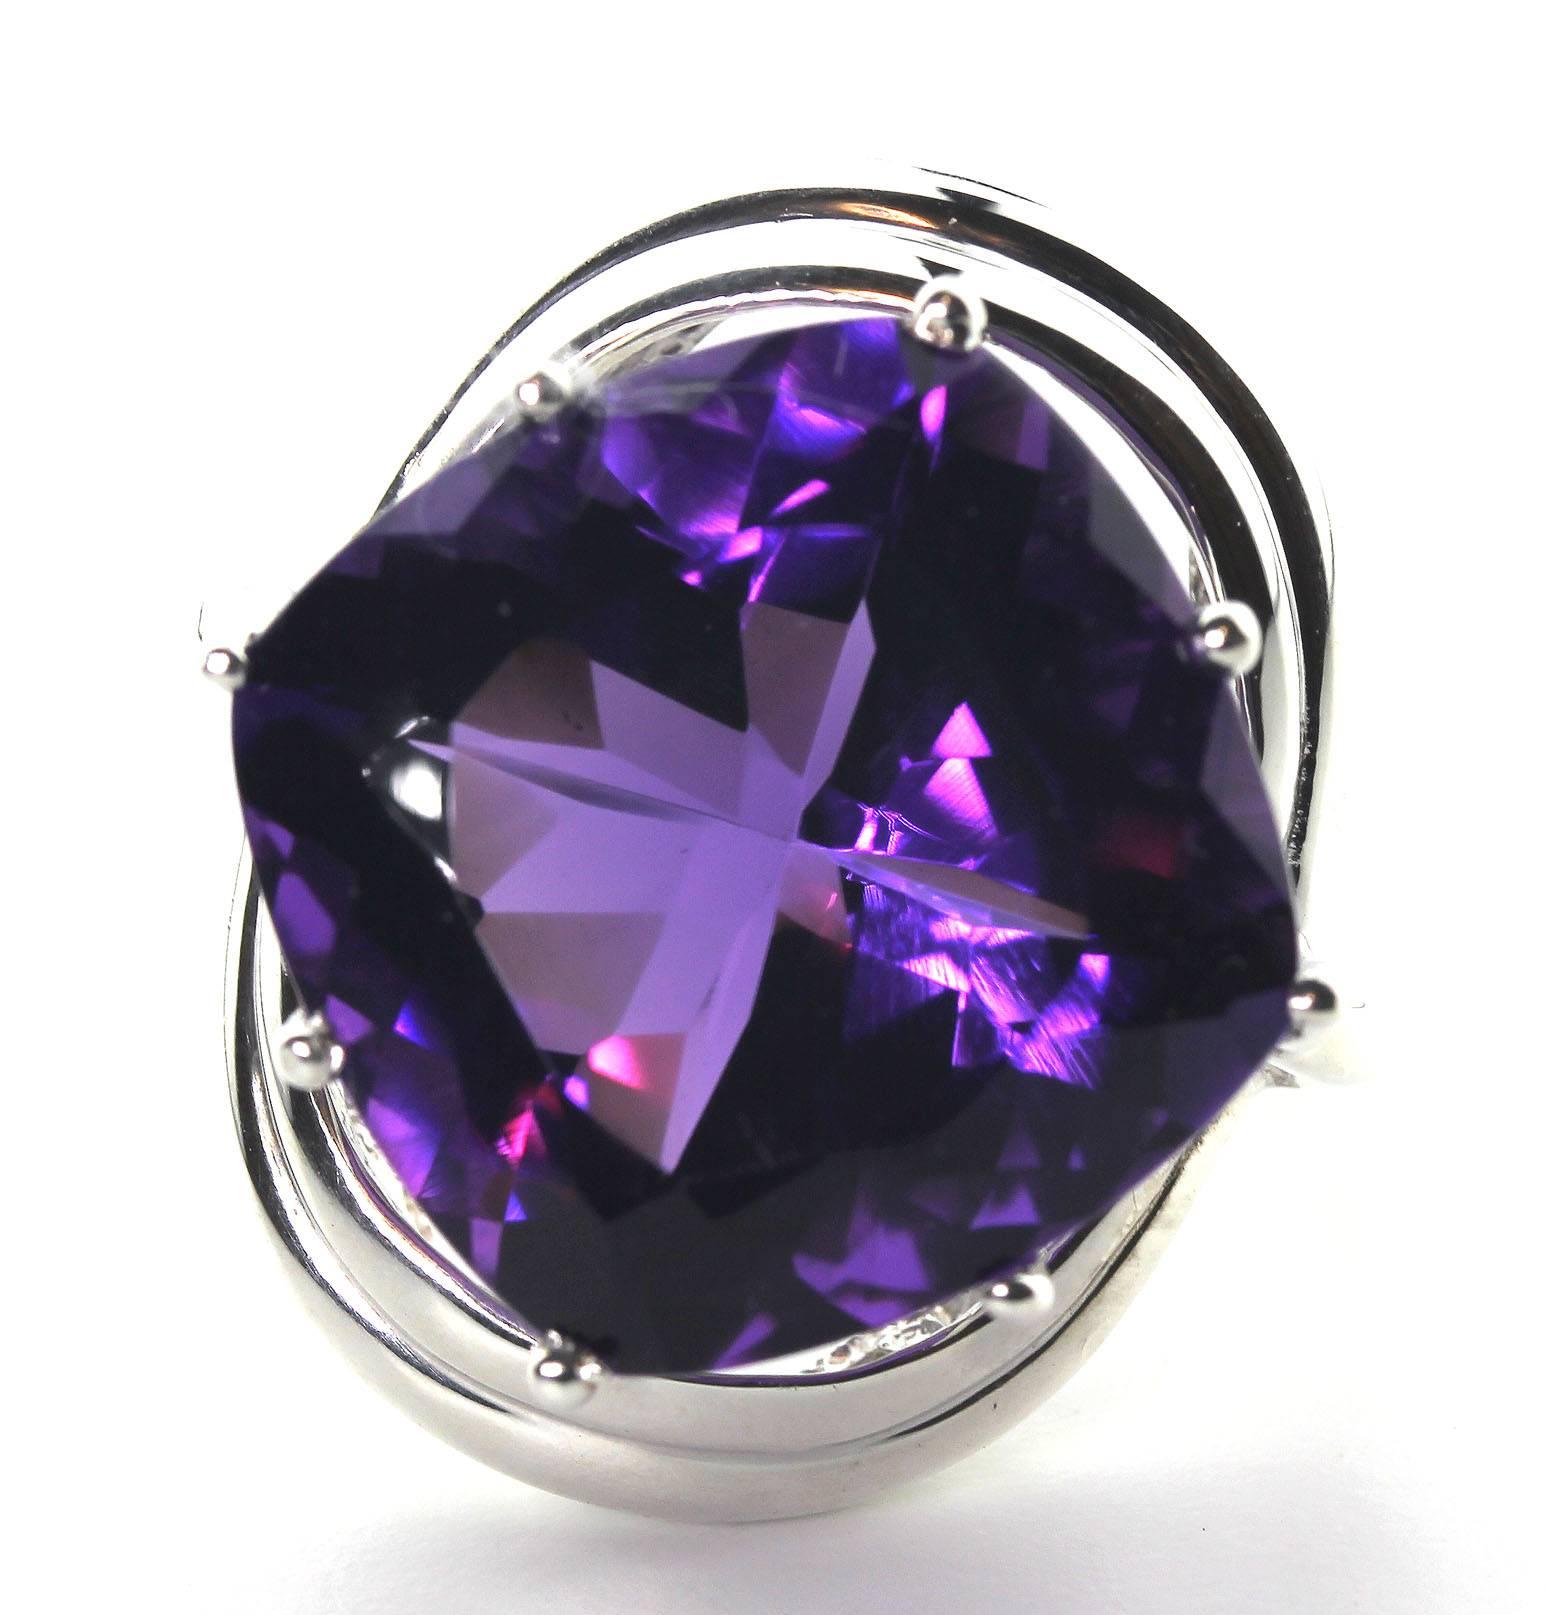 This deeply purple hugely sparkling 16 Carat square cut exceptional flawless African Amethyst is 17 mm x 17 mm set in a beautiful sweeping Sterling Silver ring.
Ring size:  7.25 sizable